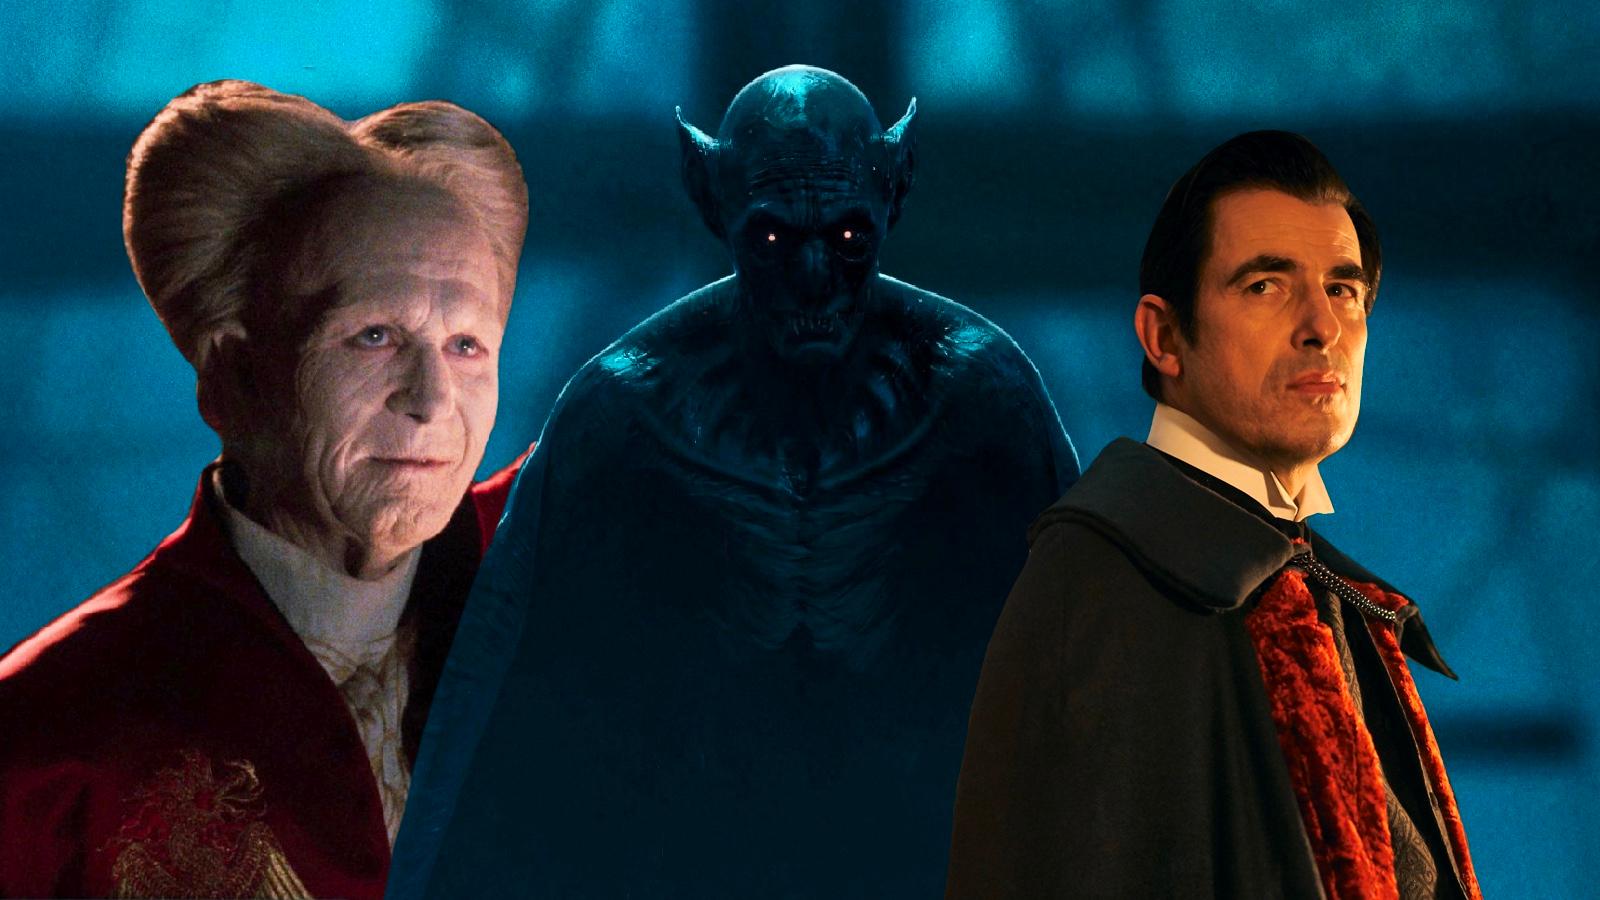 Bram Stoker's Dracula movie 1993, The Last Voyage of the Demeter 2023, and Netflix's Dracula show.